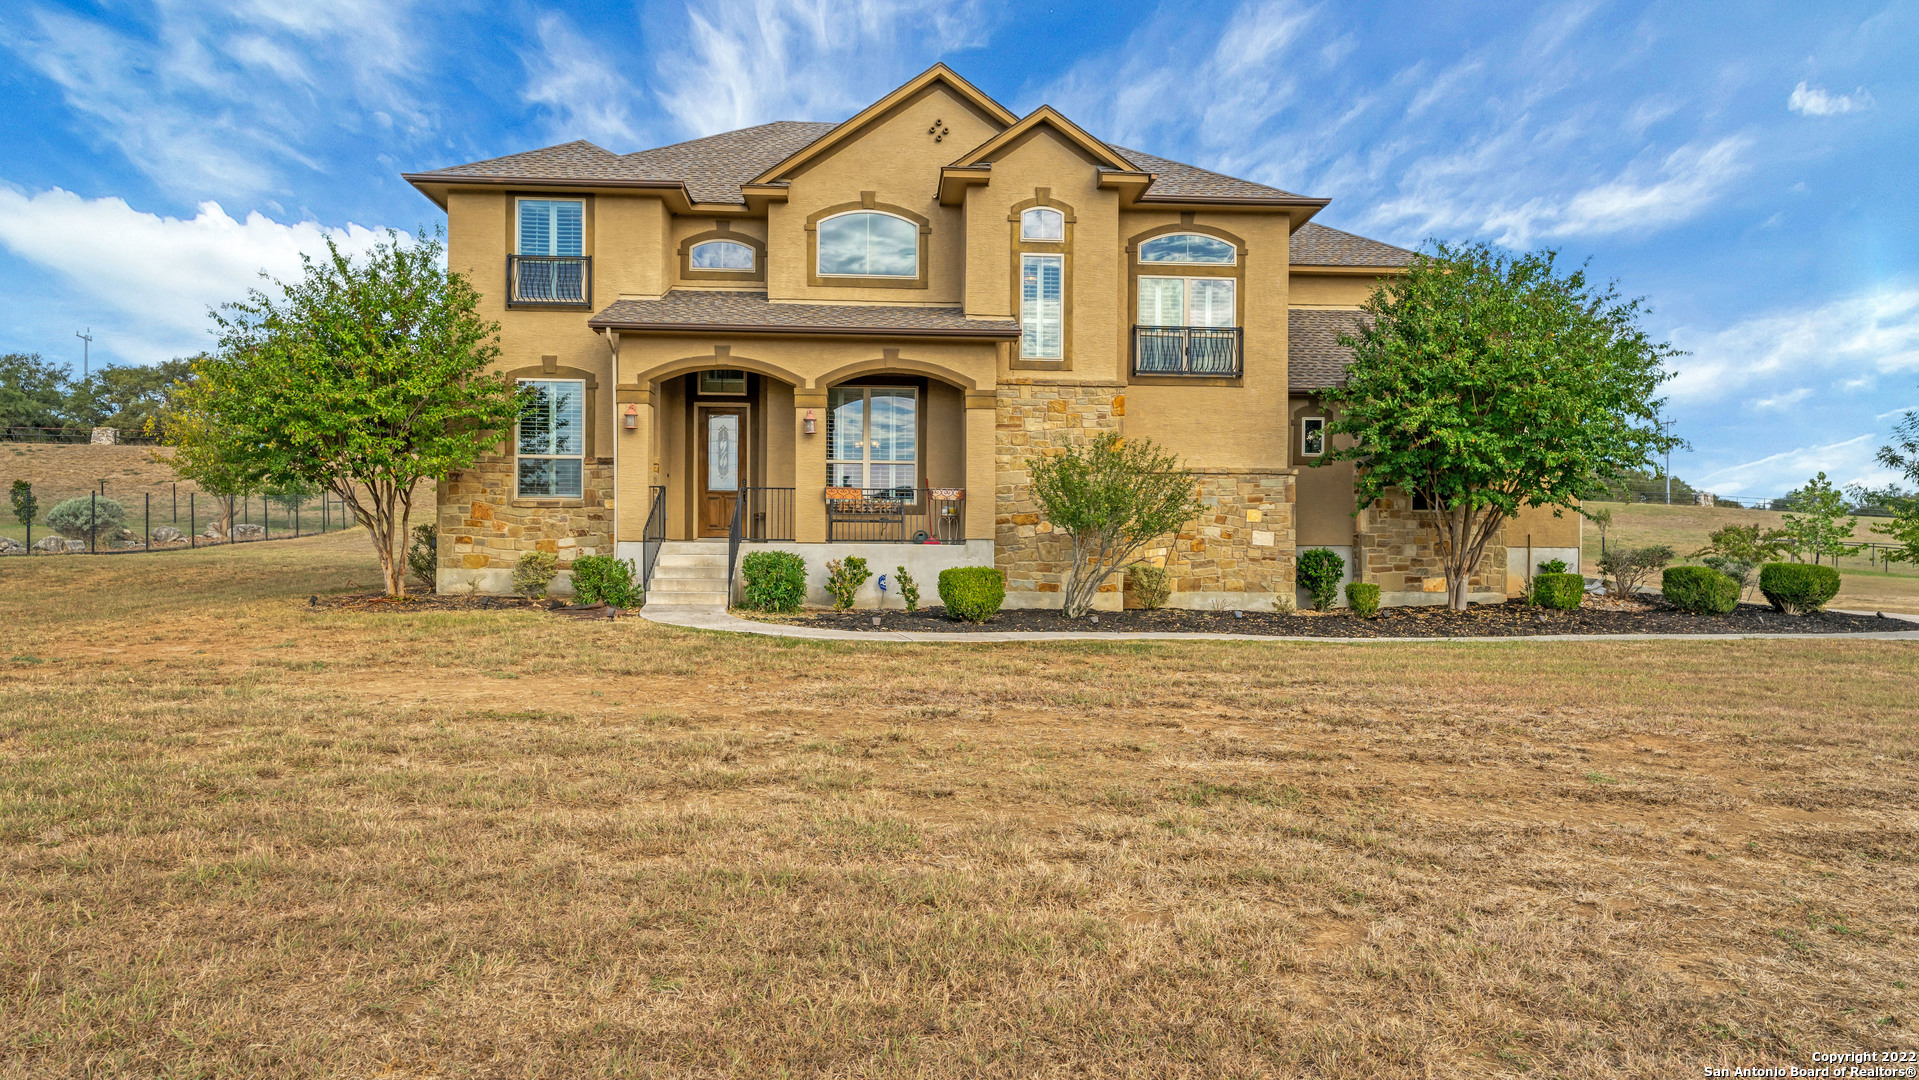 Photo of 26219 Park Bend Dr in New Braunfels, TX